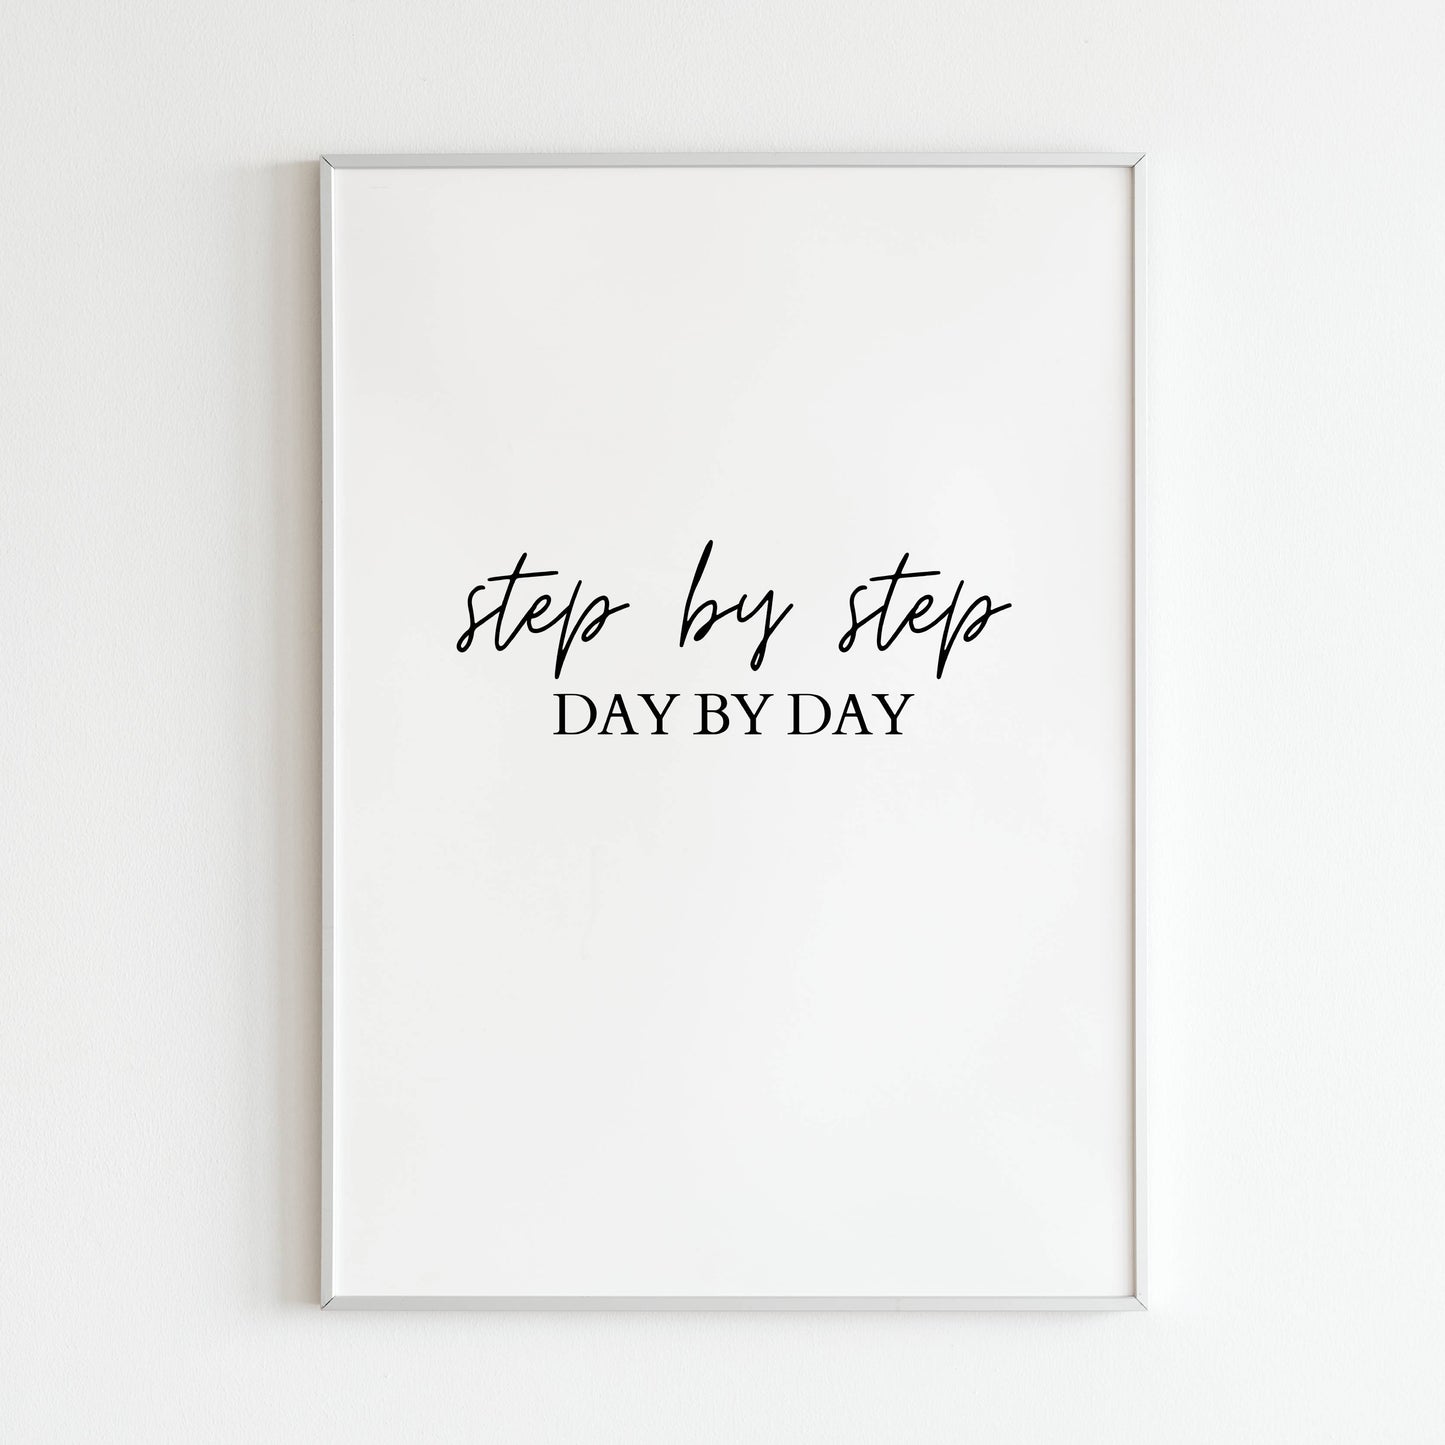 Downloadable "Step by Step Day by Day" art print, remind yourself and others that goals are achieved one step at a time.